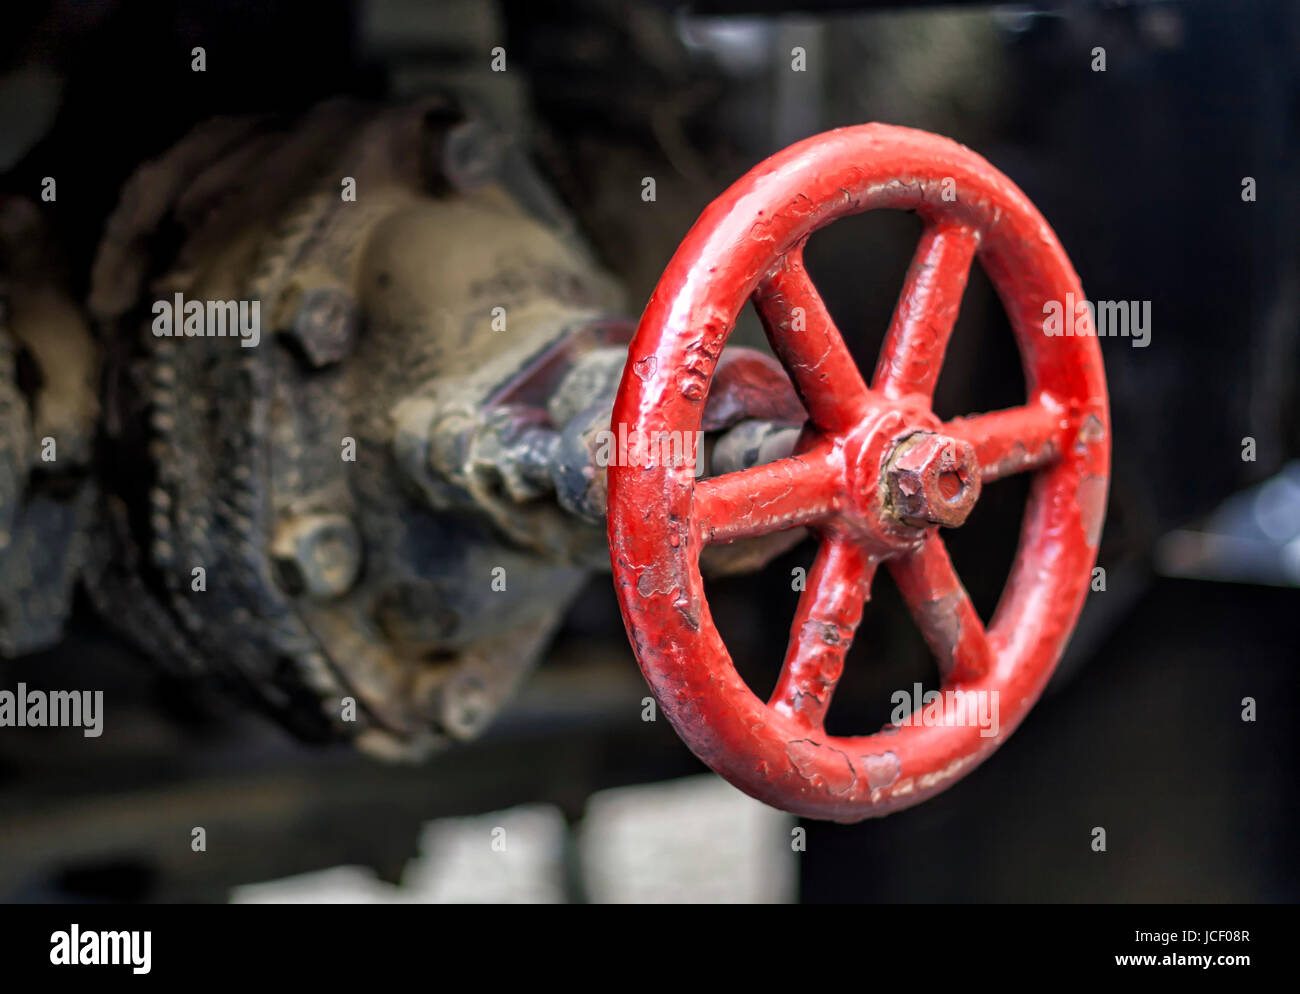 A grimmy red wheel valve regulating the flow of industial base liquids. Stock Photo